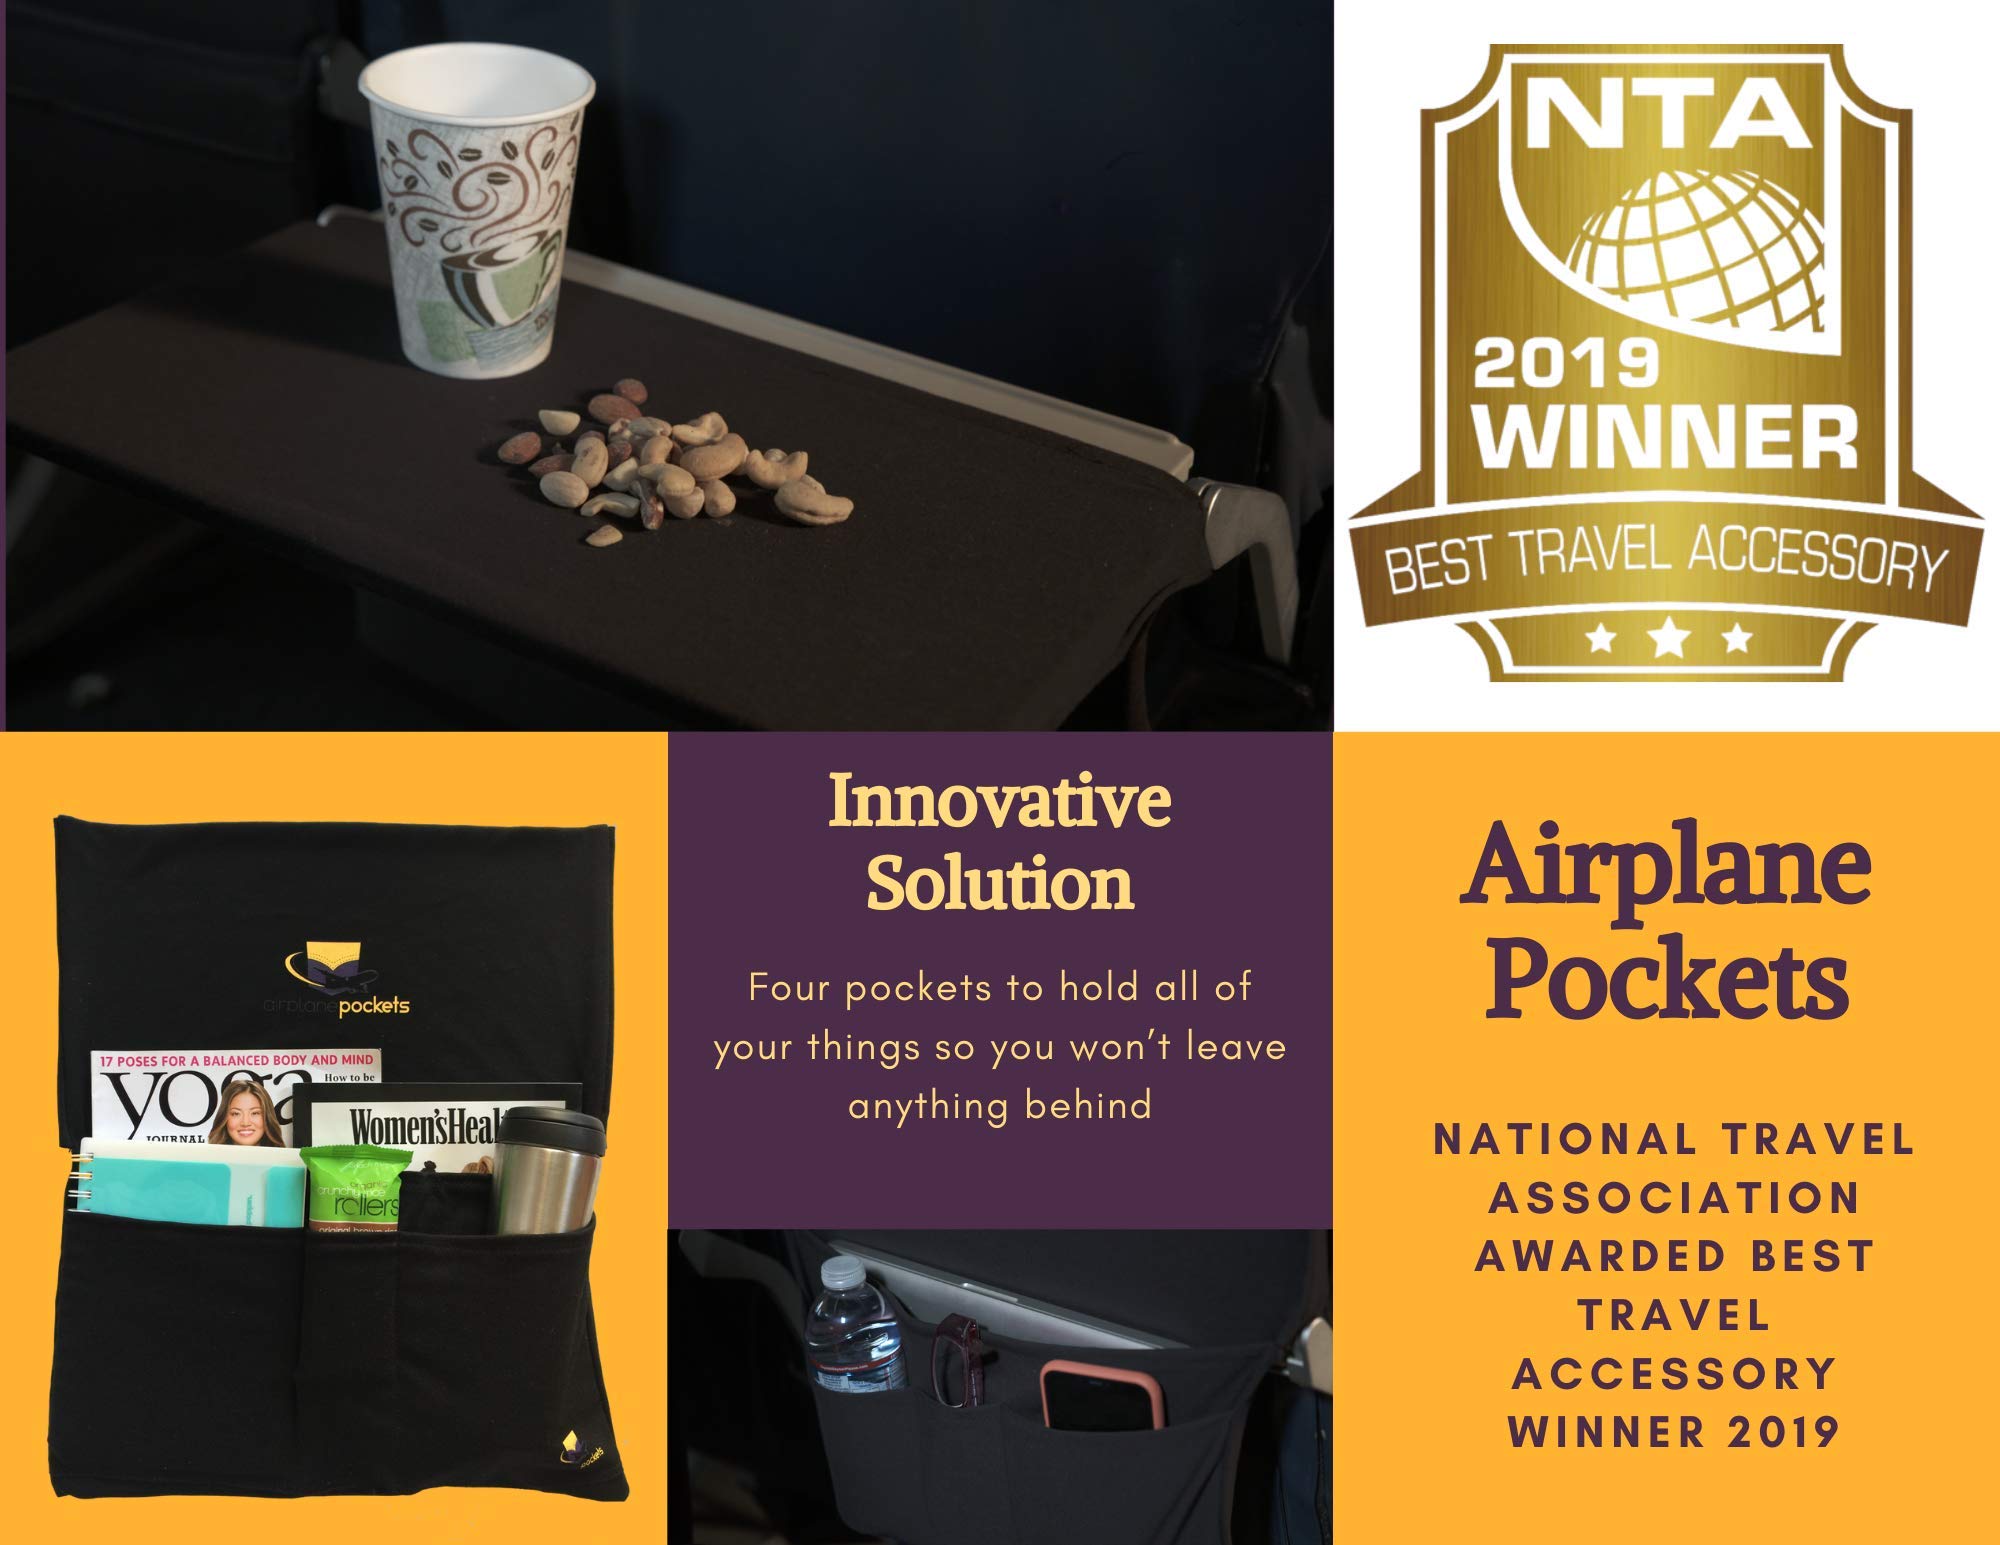 Airplane Pockets Tray Table Cover - Sanitary Cover with Pockets